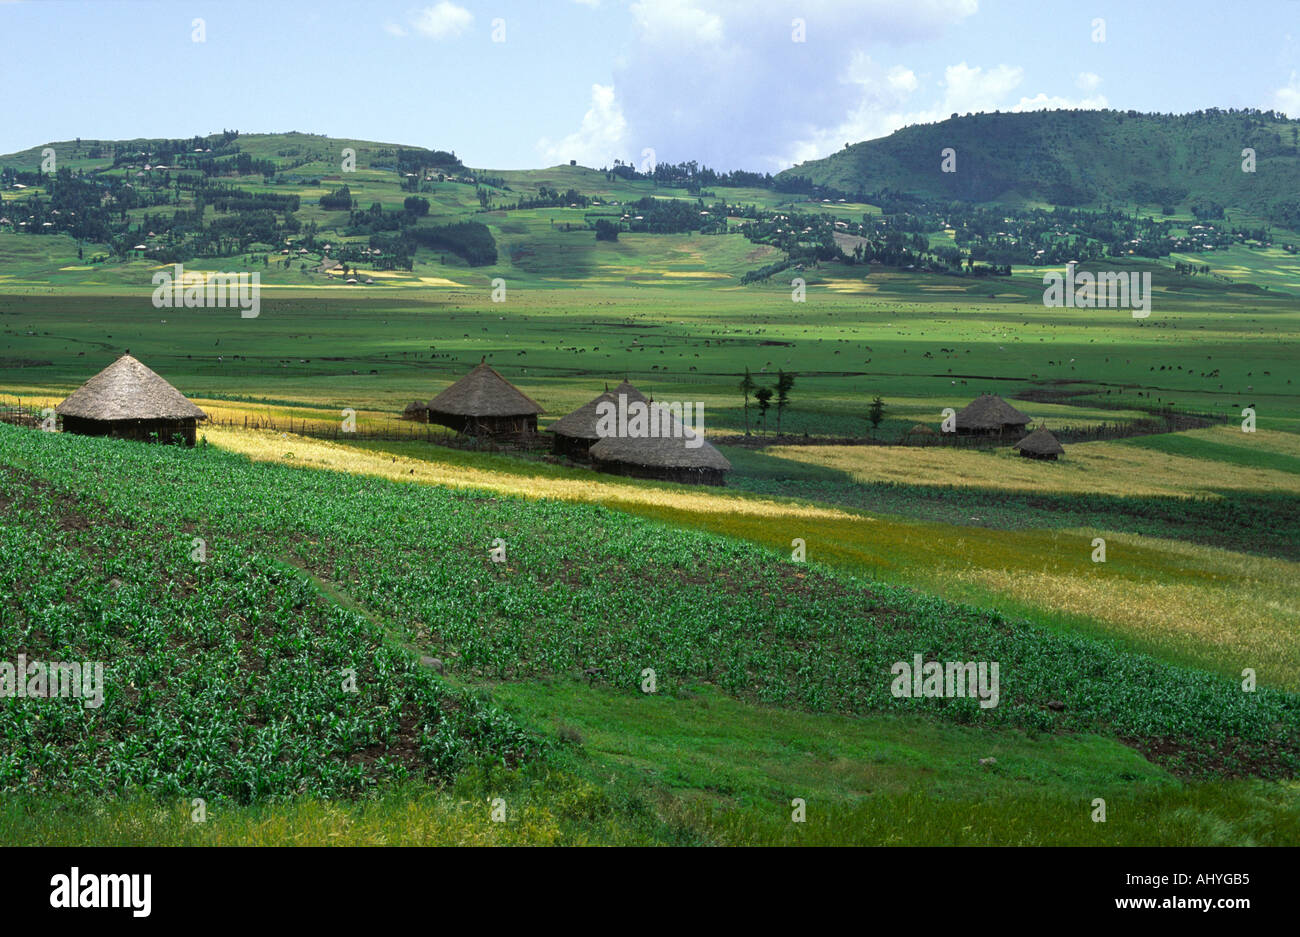 A deforested, verdant, fertile valley with traditional huts, maize, grass pea cultivation and cattle near Dessie, Wollo Zone, Ethiopia Stock Photo